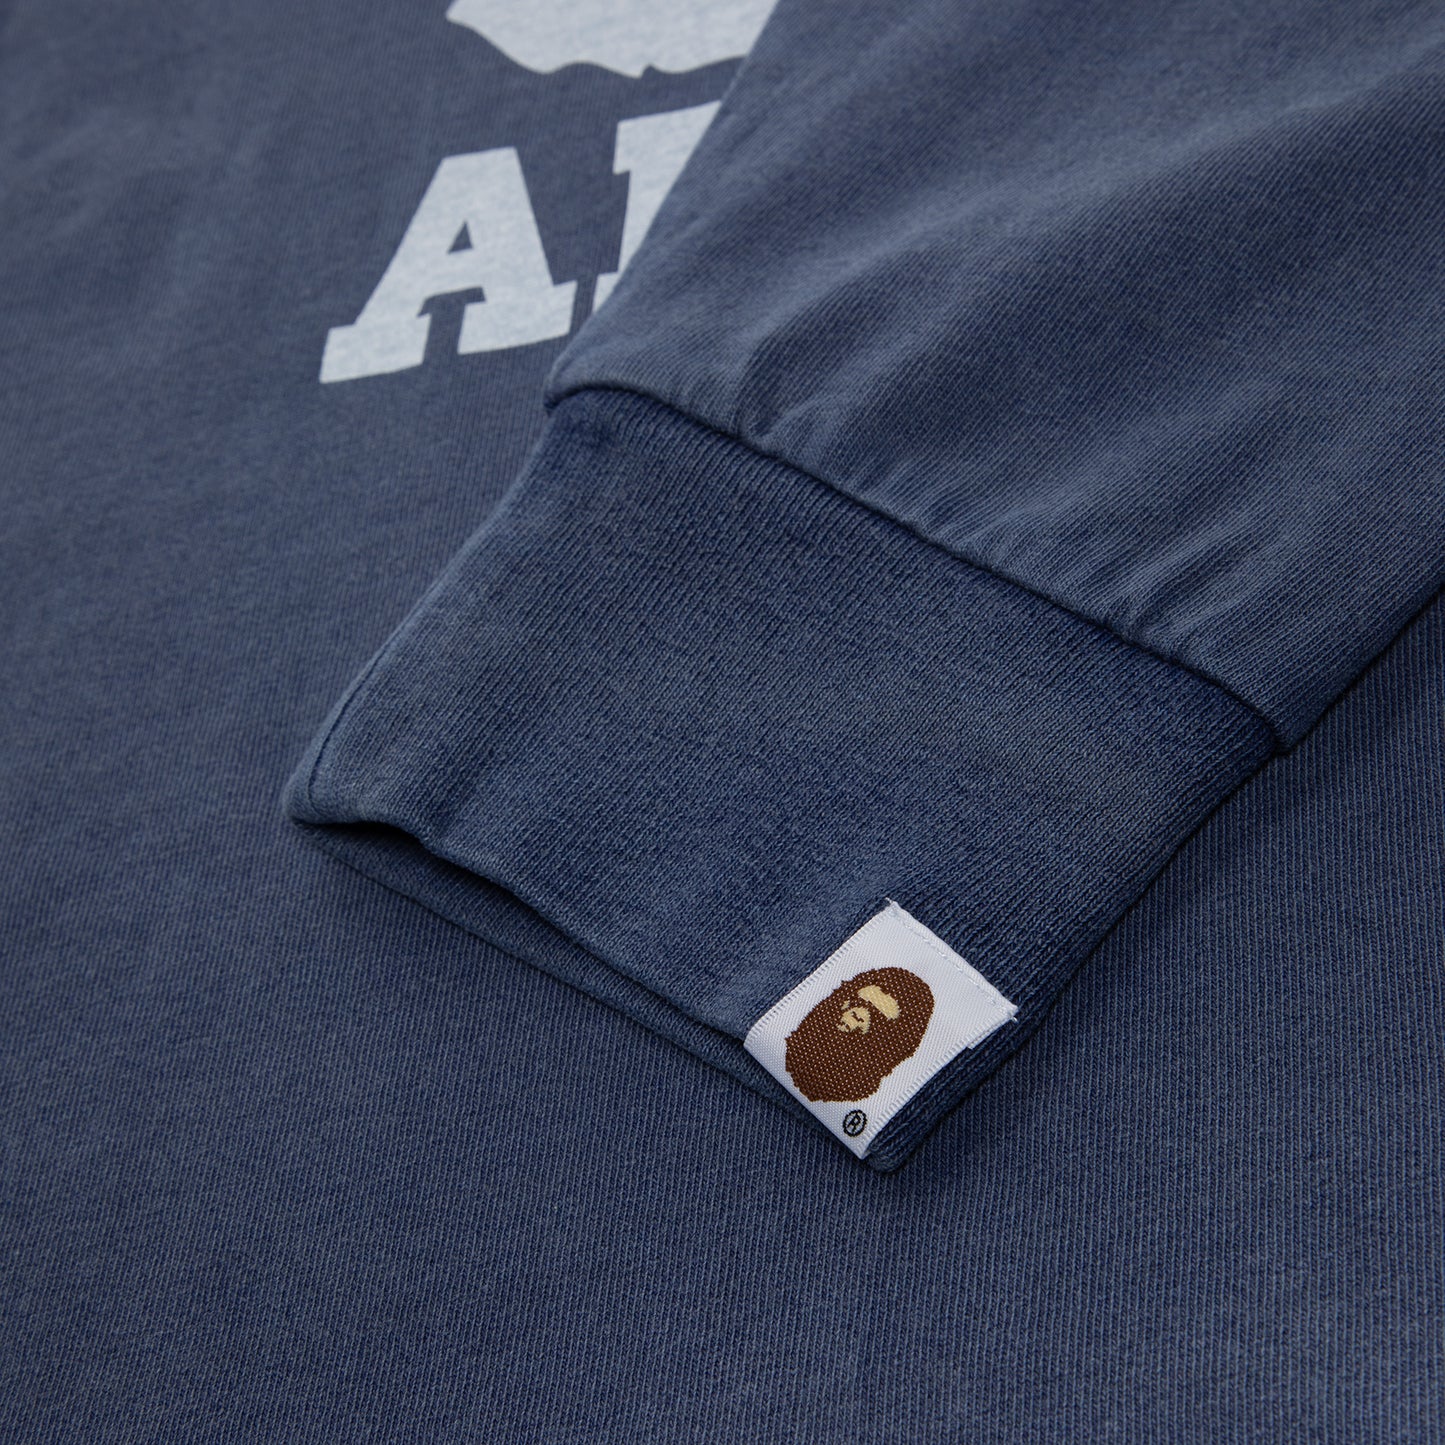 A Bathing Ape Overdye College Relaxed Fit Long Sleeve Tee (Navy)